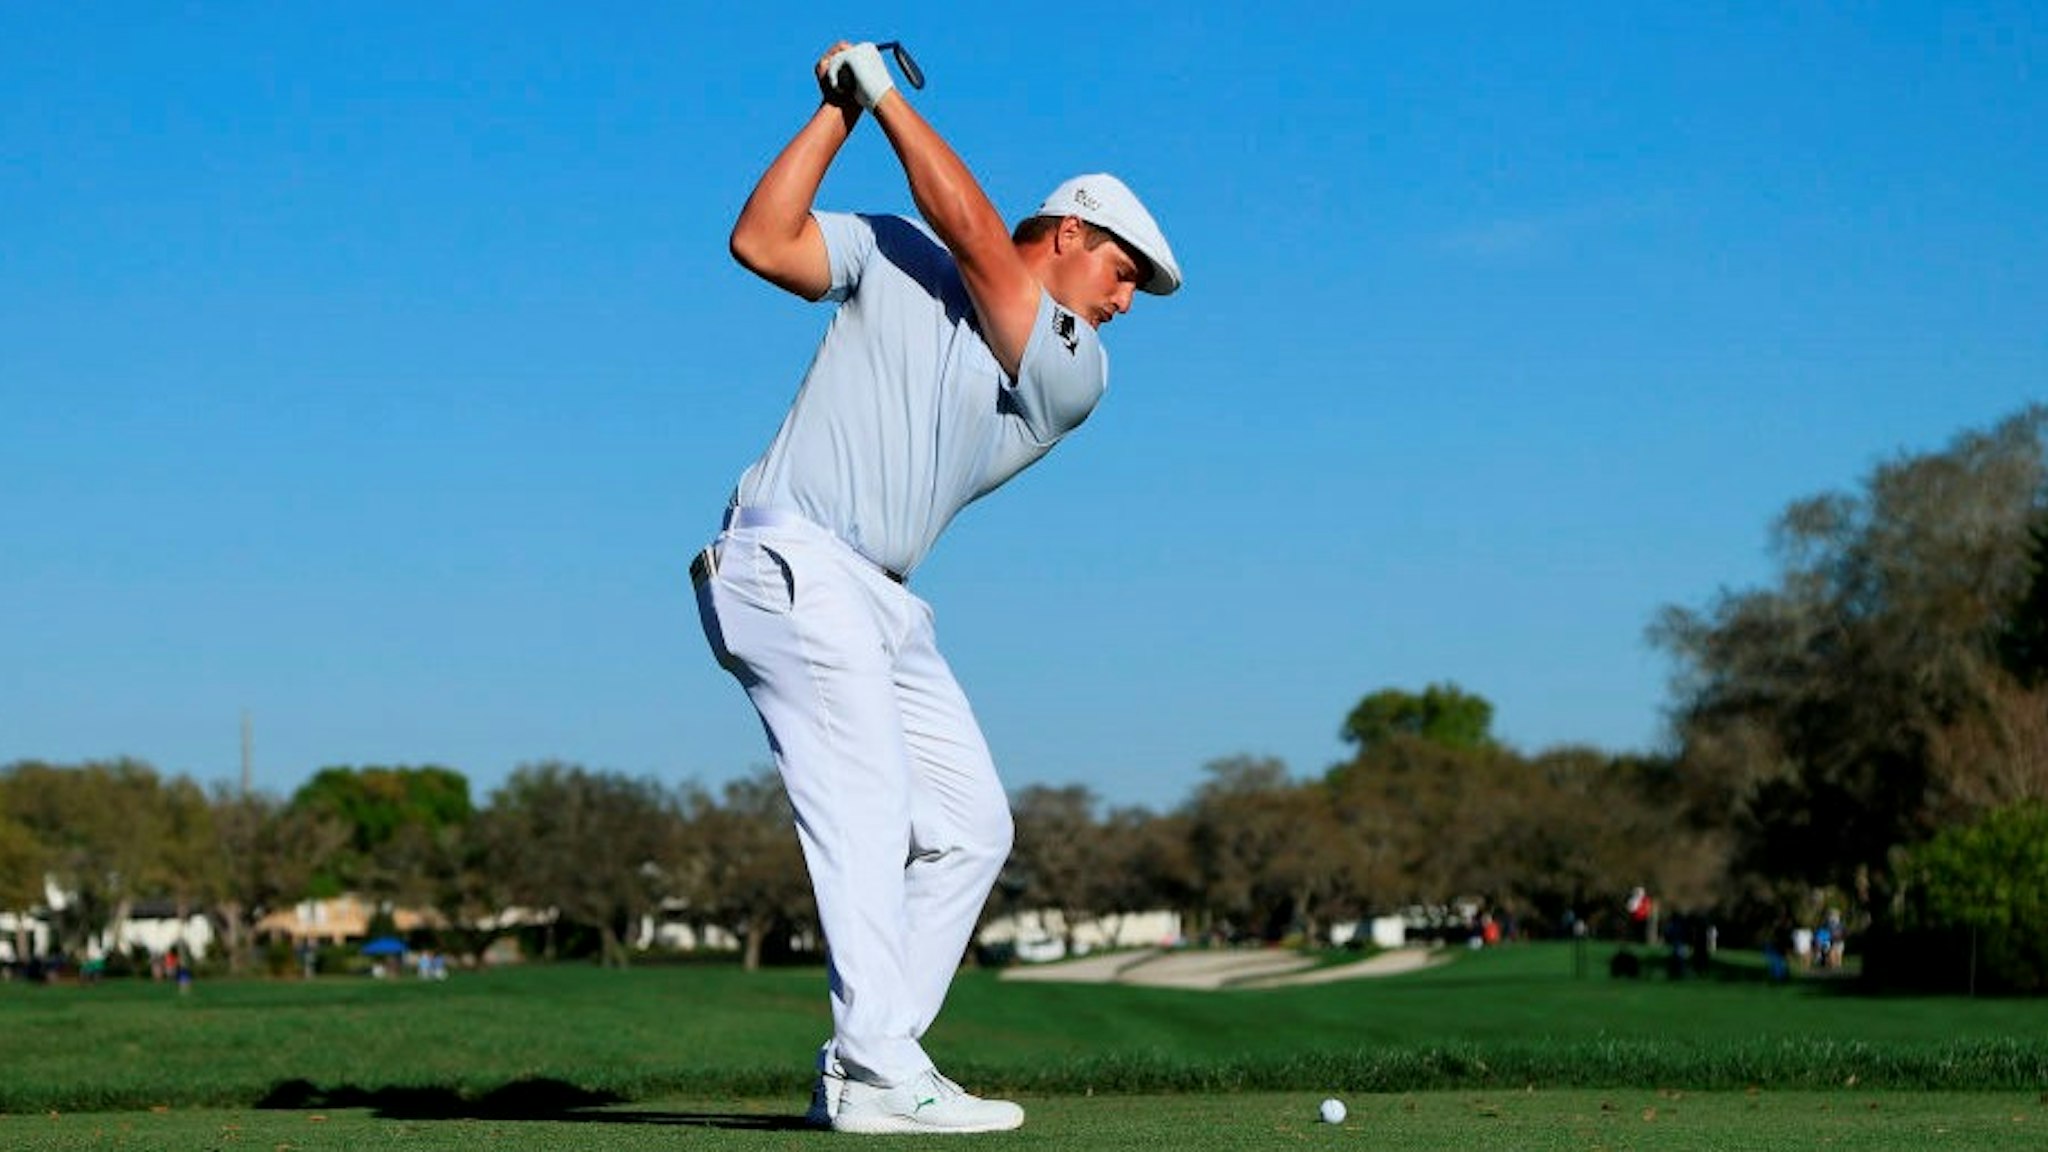 ORLANDO, FLORIDA - MARCH 07: Bryson DeChambeau of the United States plays his shot from the 11th tee during the final round of the Arnold Palmer Invitational Presented by MasterCard at the Bay Hill Club and Lodge on March 07, 2021 in Orlando, Florida. (Photo by